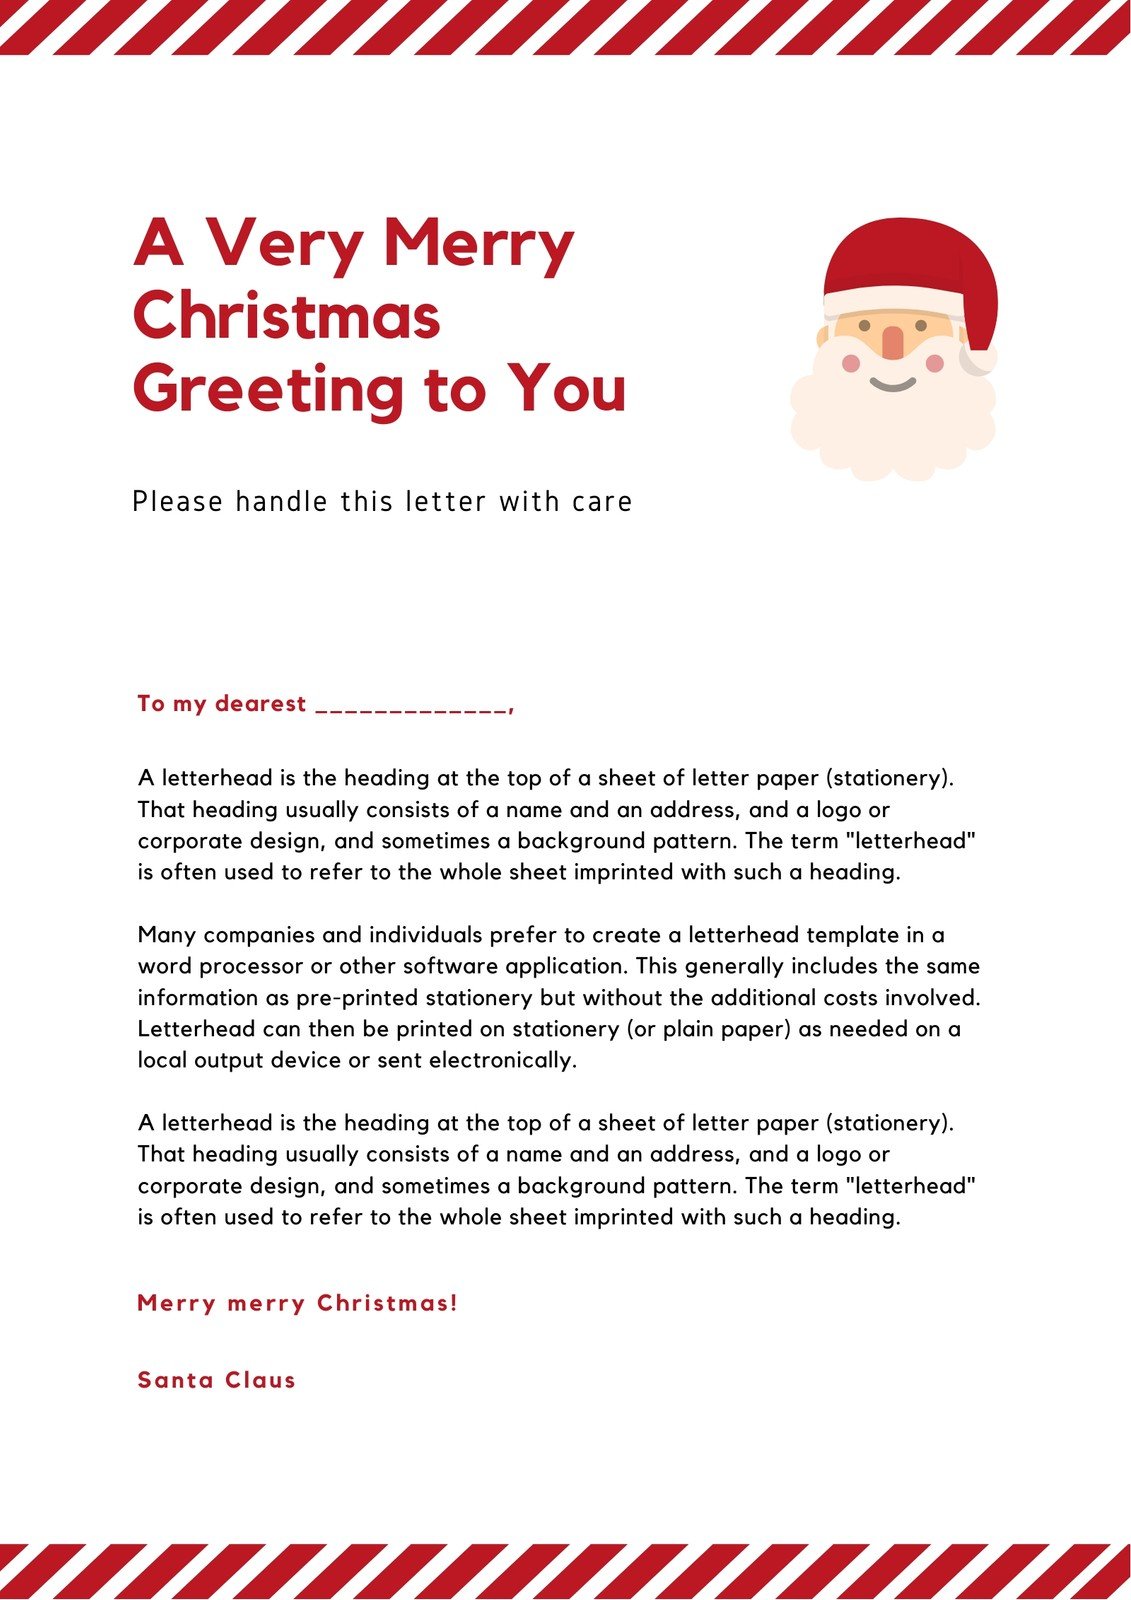 Free printable Santa letter templates you can customize  Canva